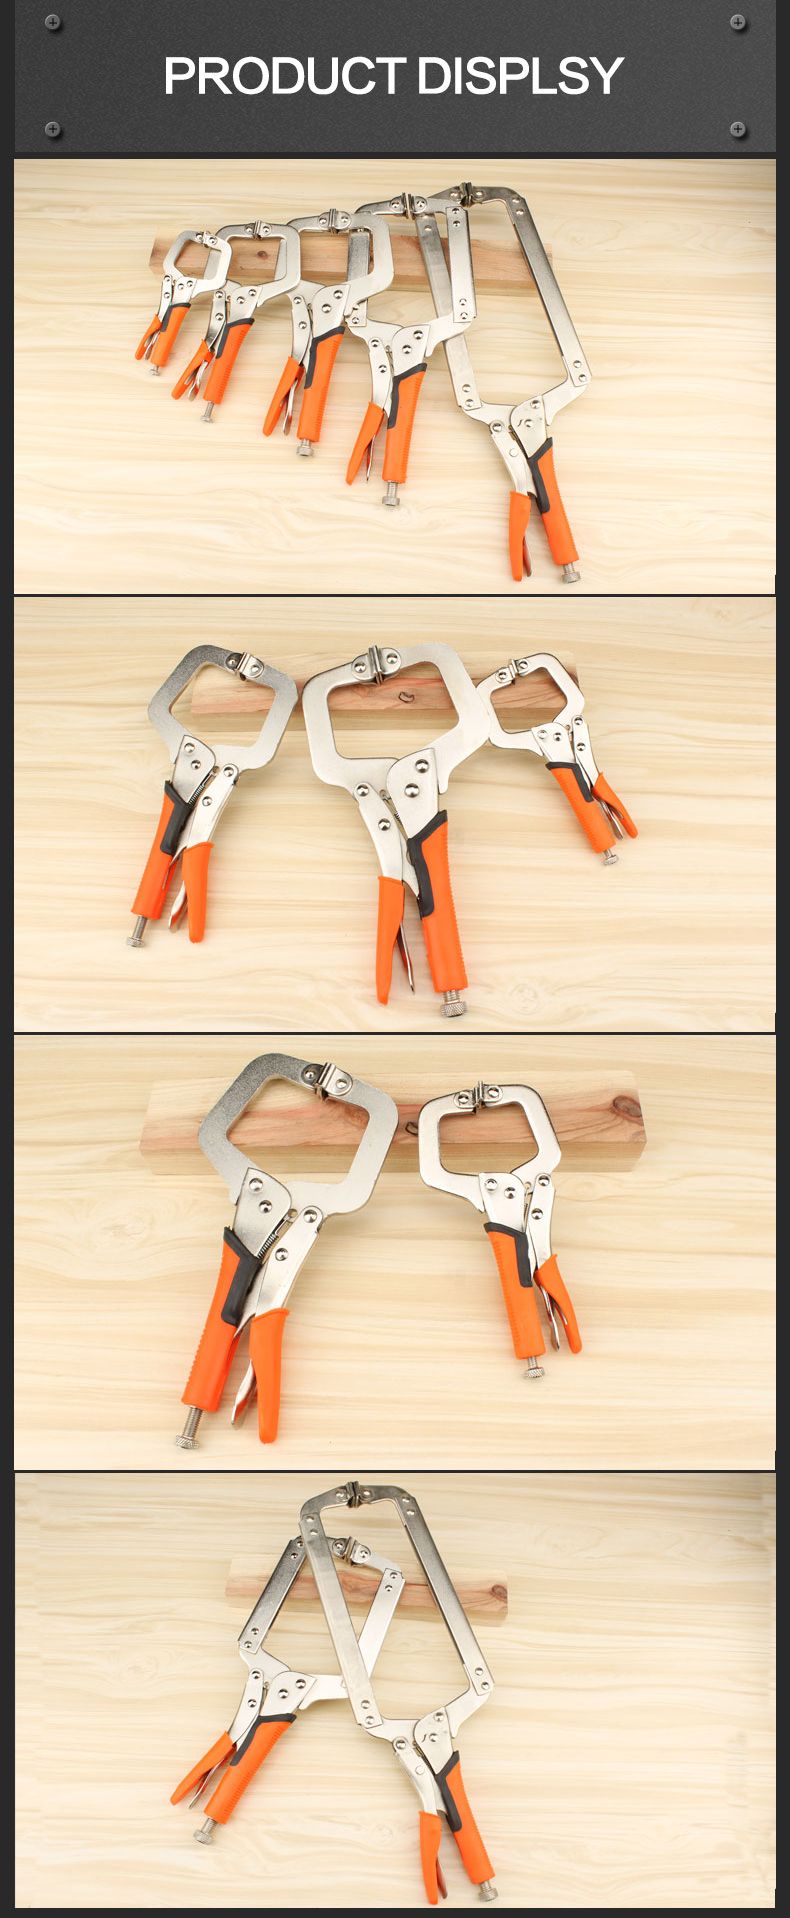 MYTEC-MC-010102-C-Type-D-type-Crimping-Pliers-Square-Mouth-Rubber-Handle-Wood-Working-Fast-Pliers-1193190